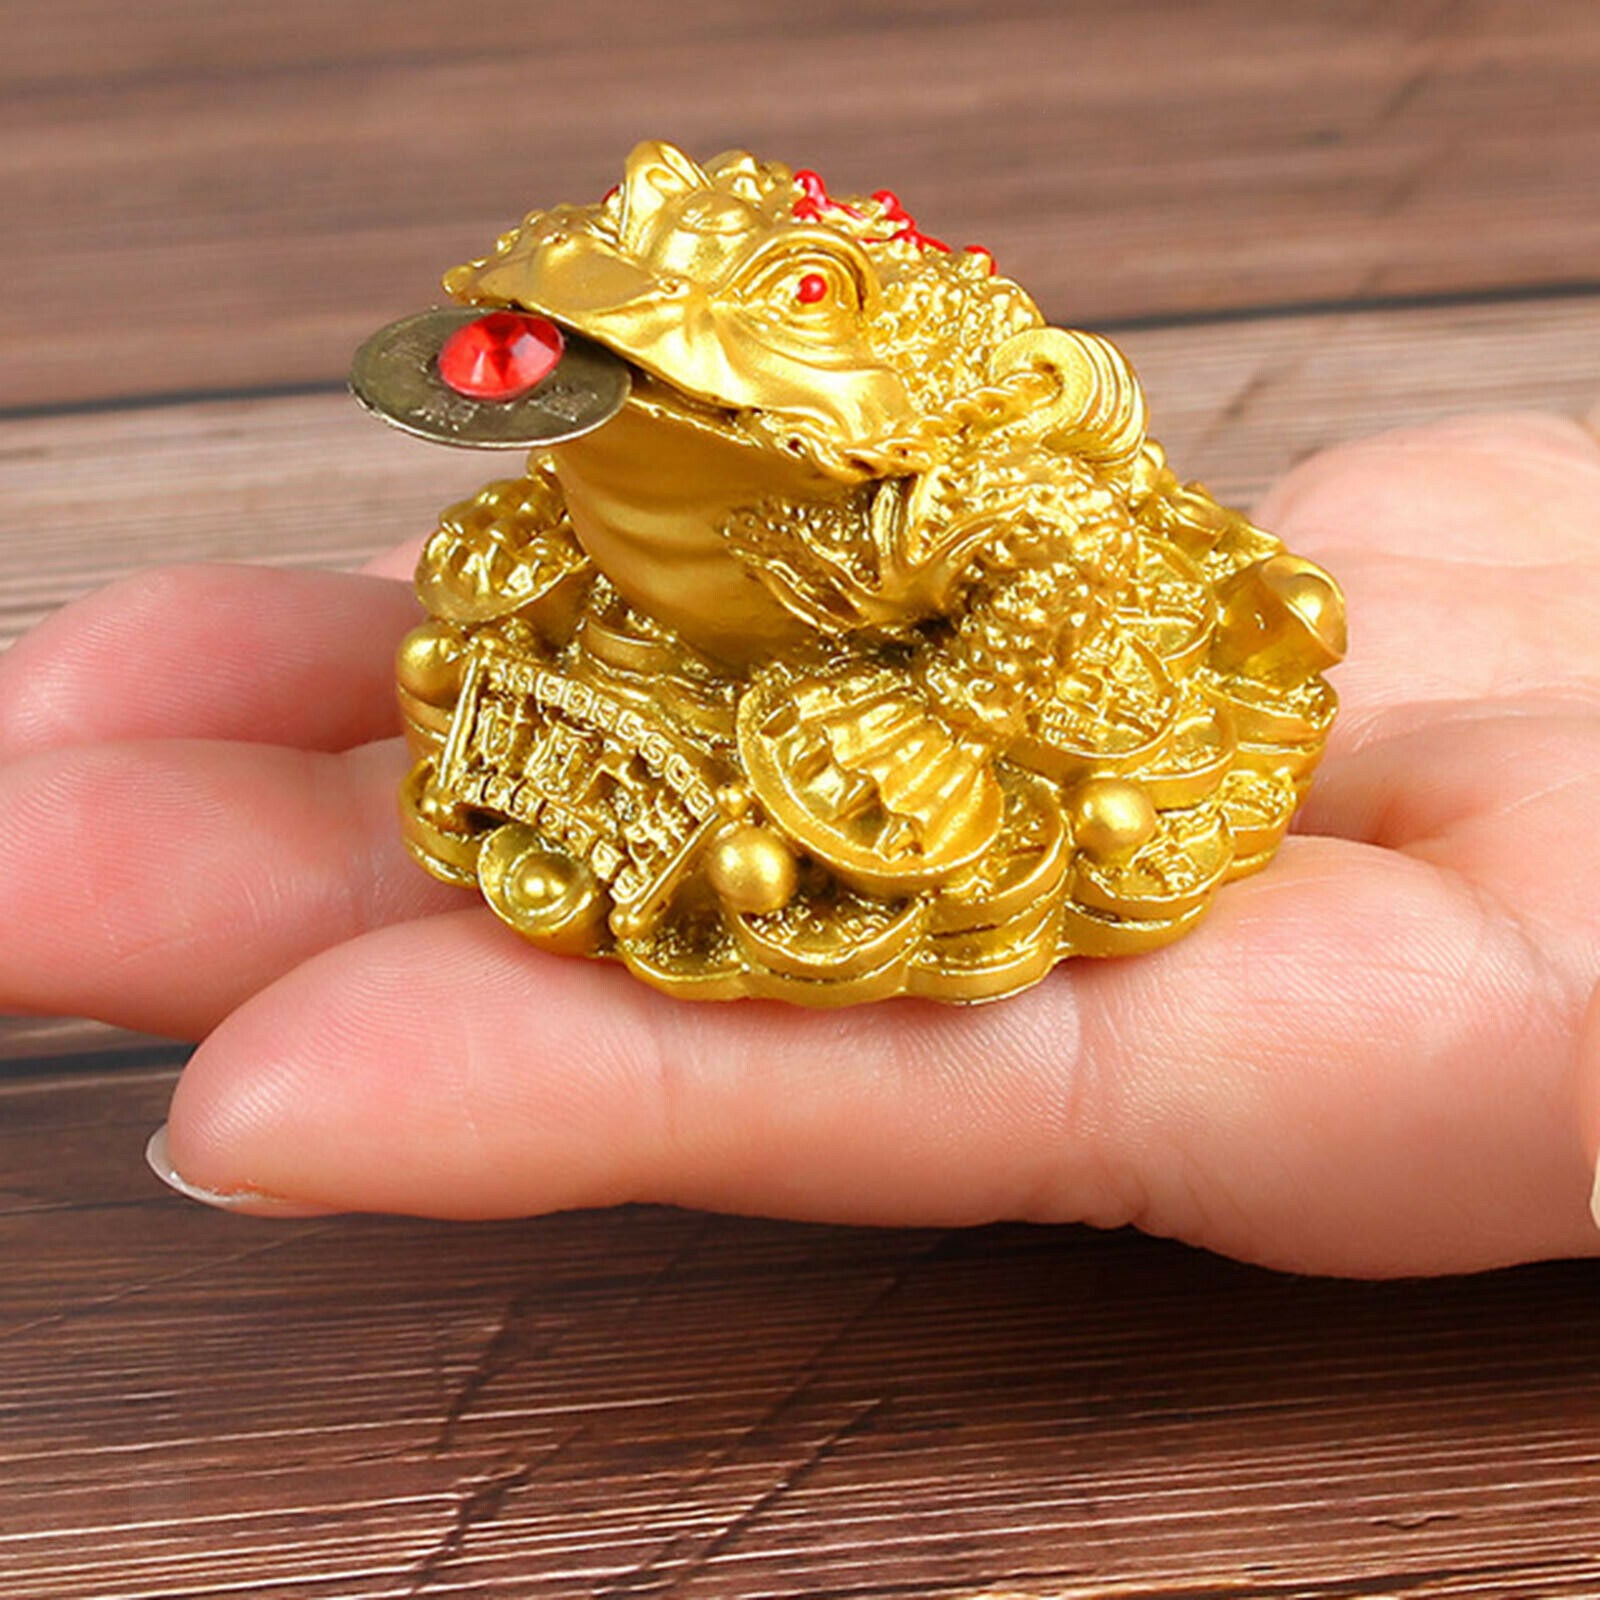 Feng Shui Money Frog Money Toad Statue with Coin Lucky Charm Wealth for Car